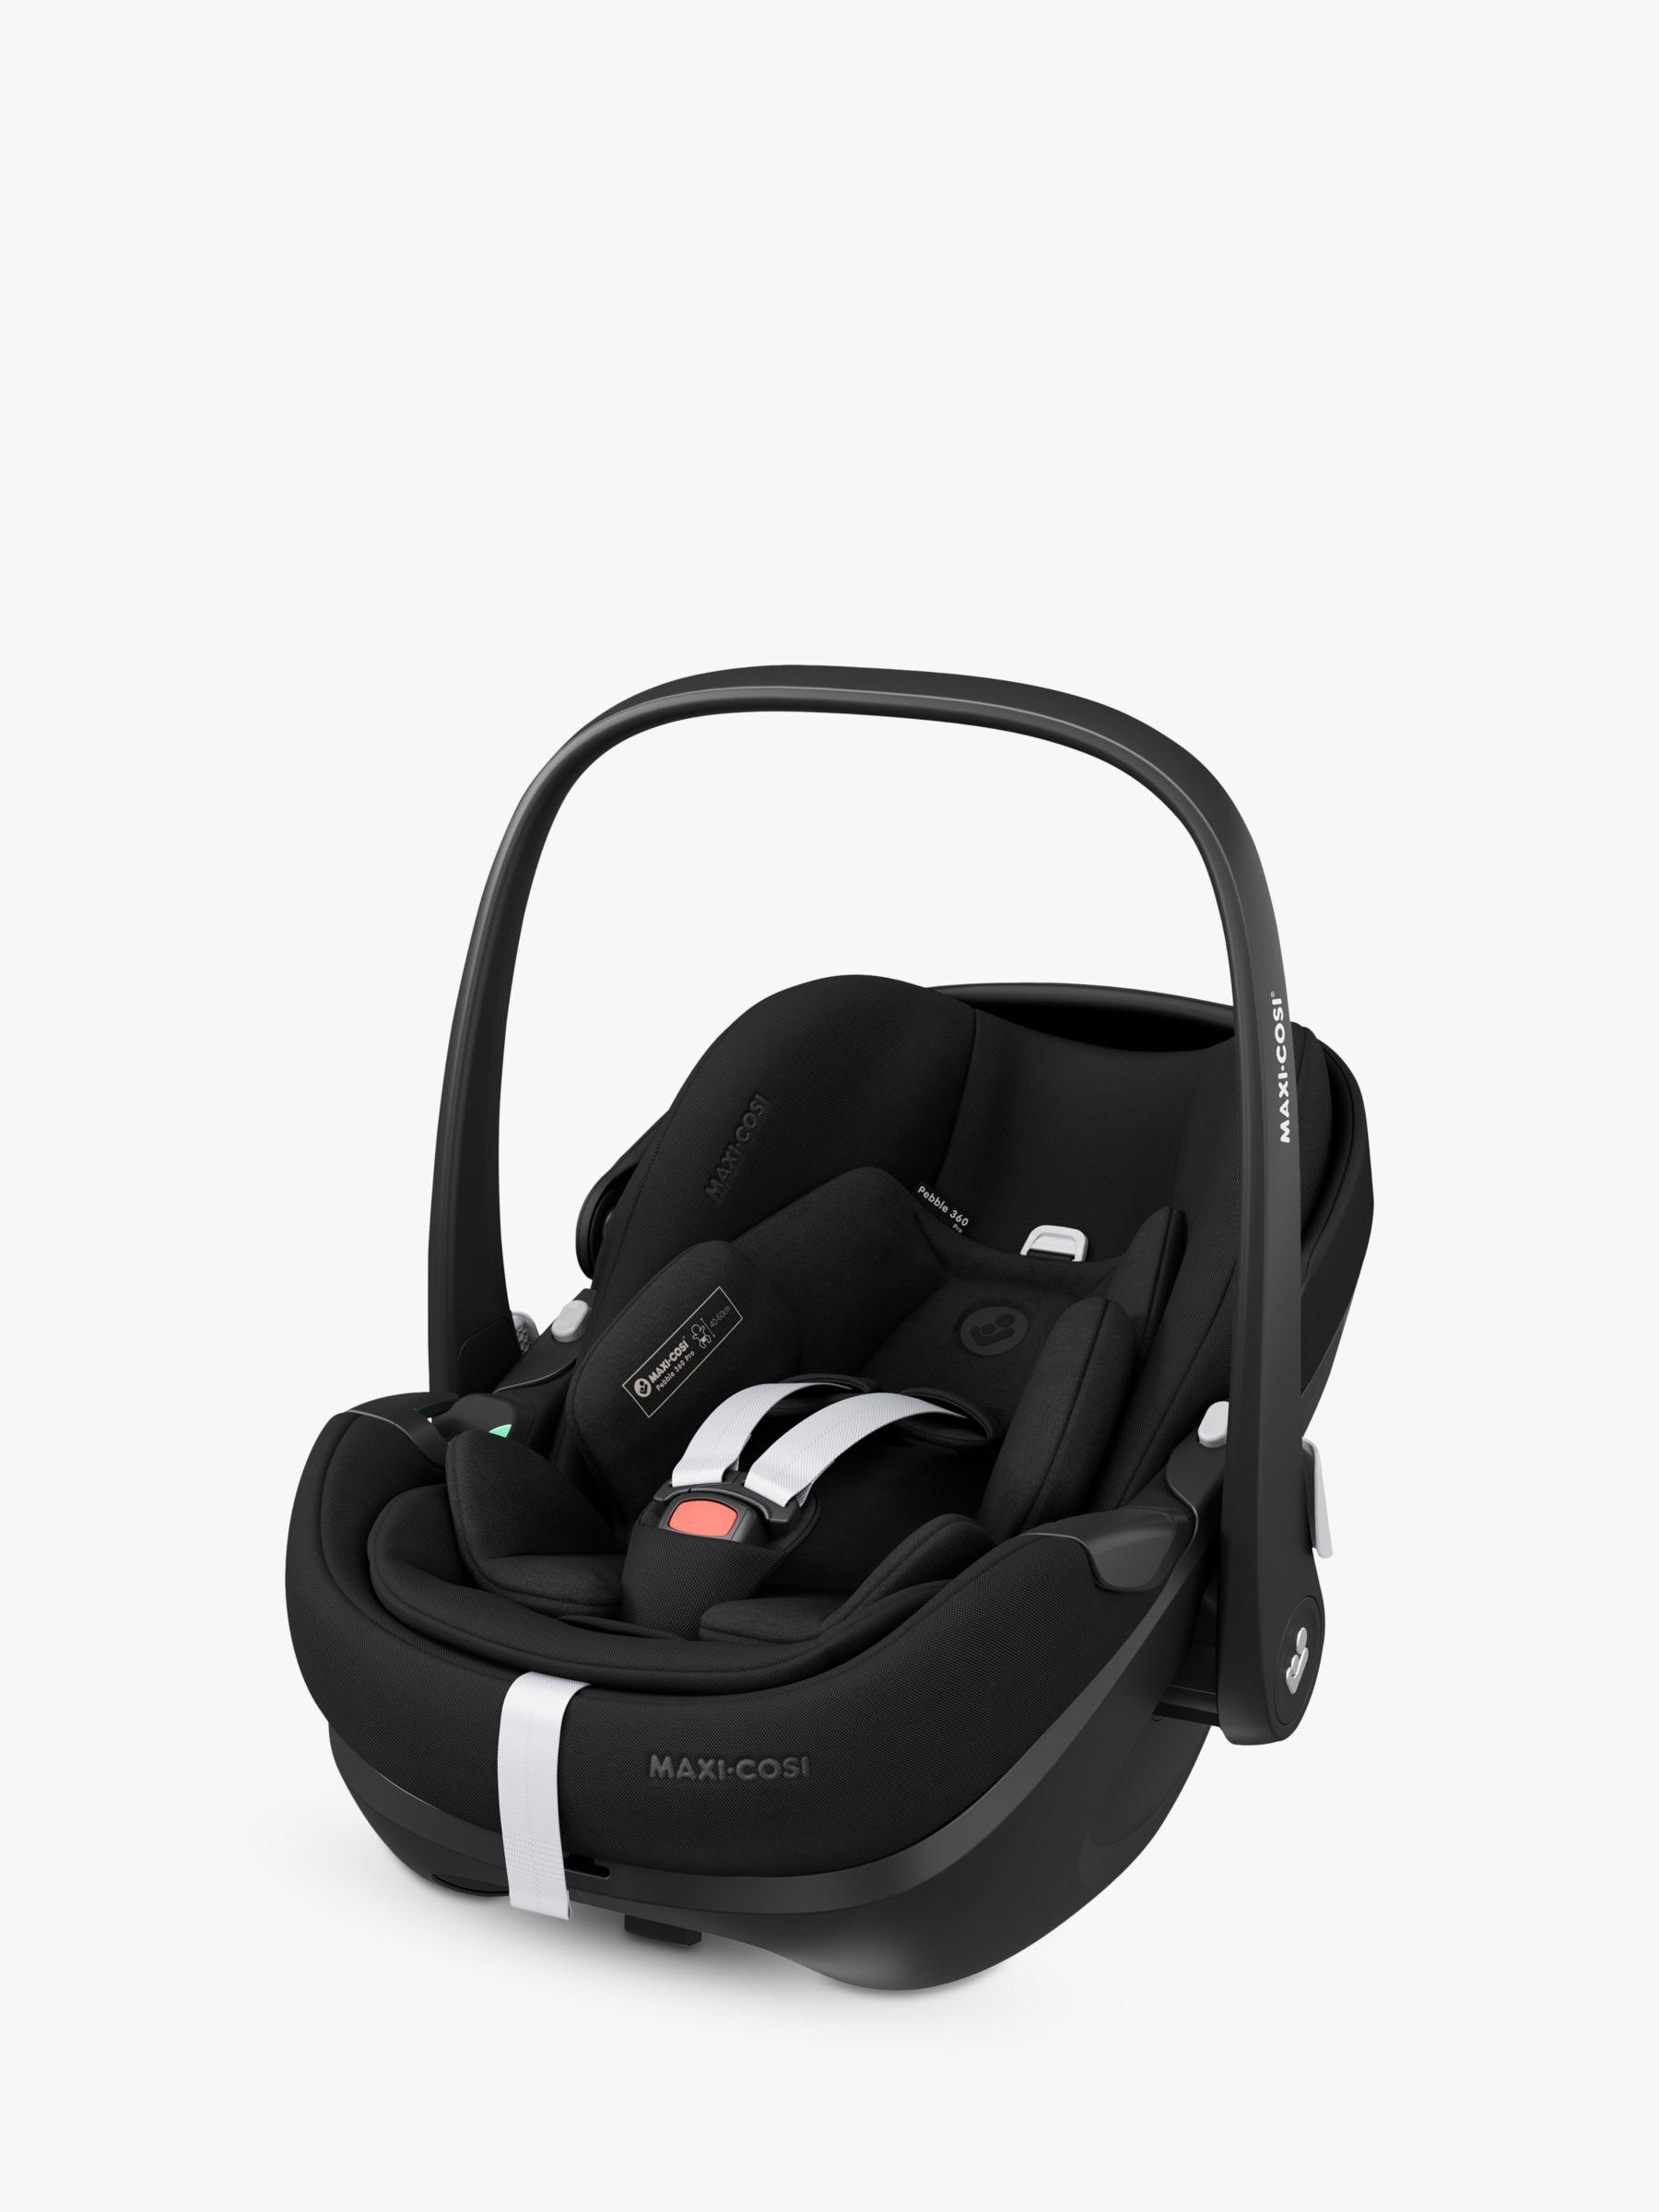 iCandy Peach 7 Pushchair & Accessories with Maxi-Cosi Pebble 360 Pro Baby Car Seat and Base Bundle, Black/Essential Black